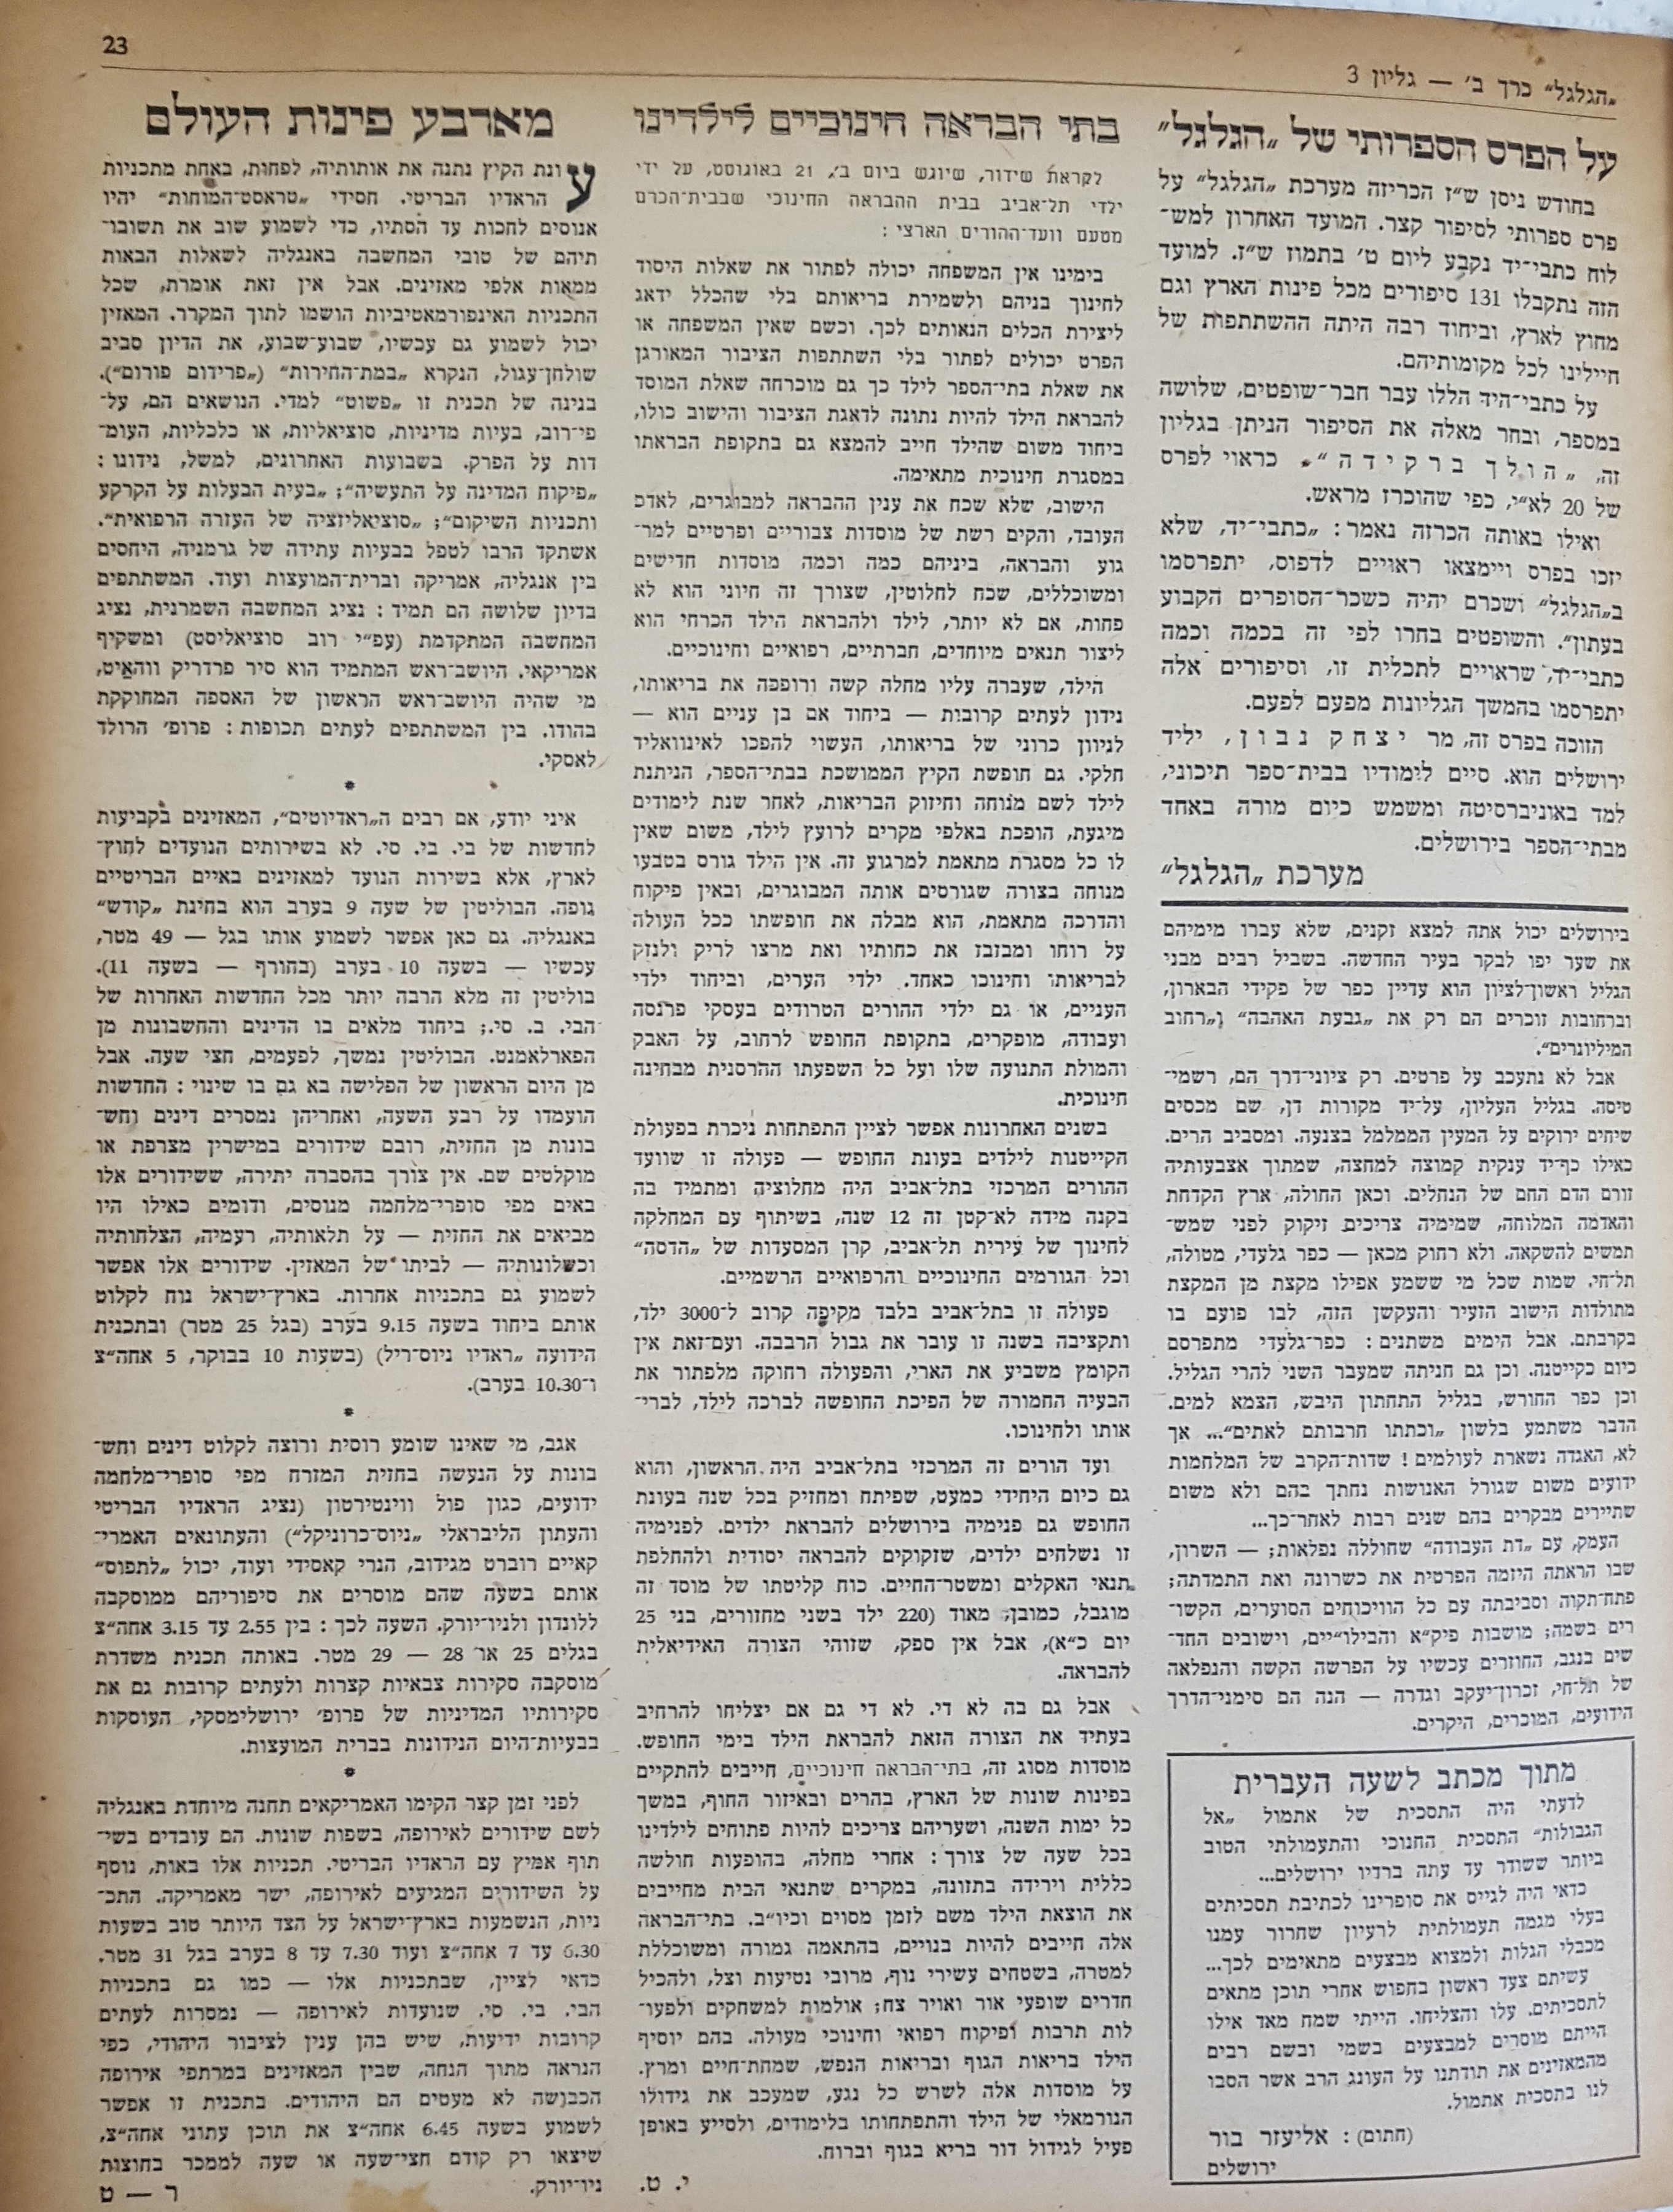   Photo: page 23